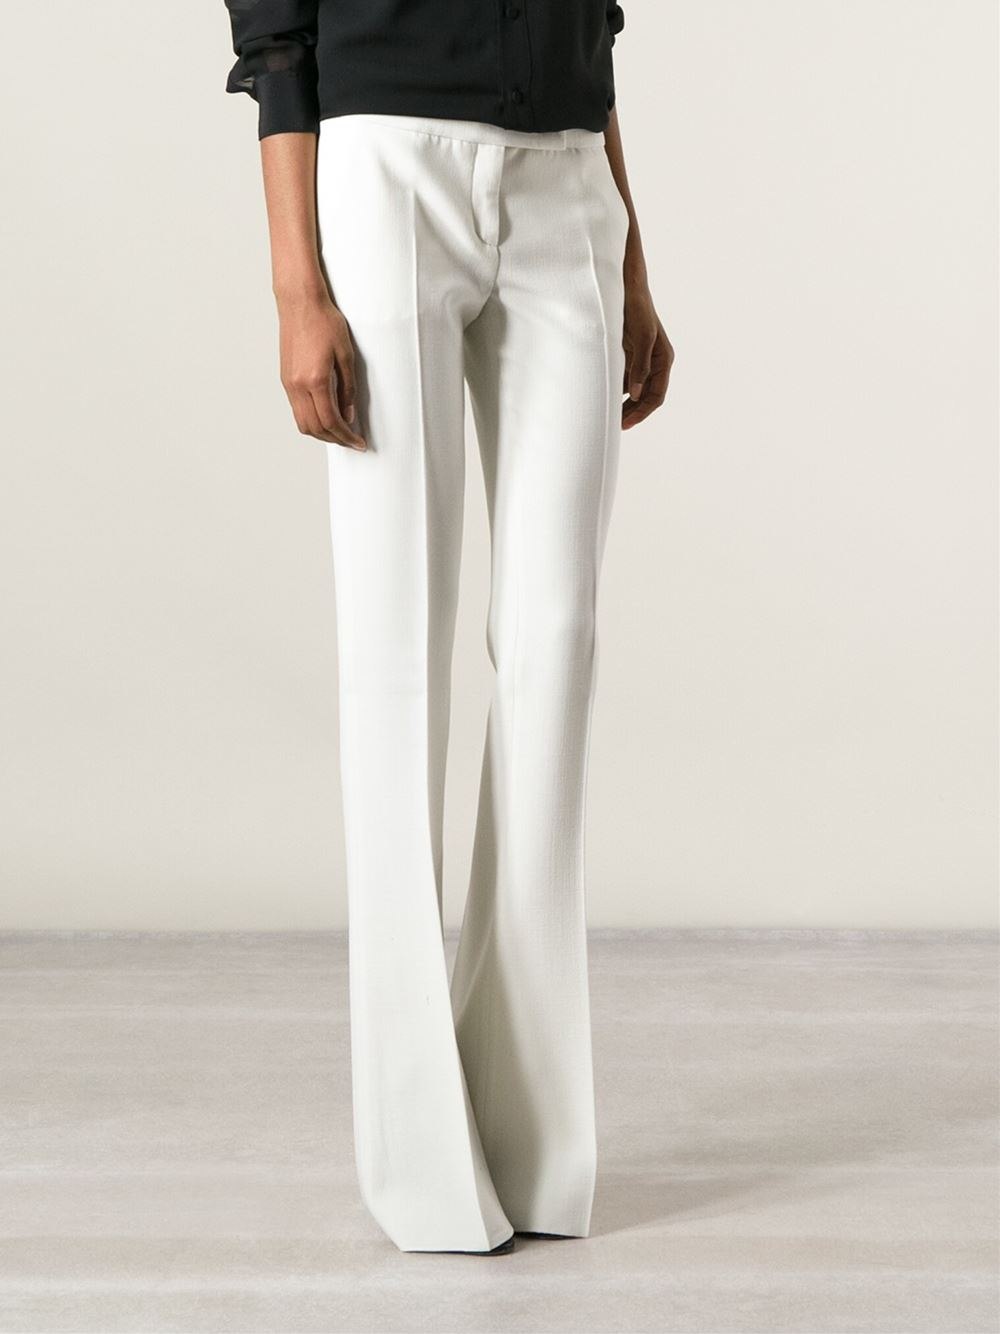 Lyst - Emilio Pucci Flared Trousers in White